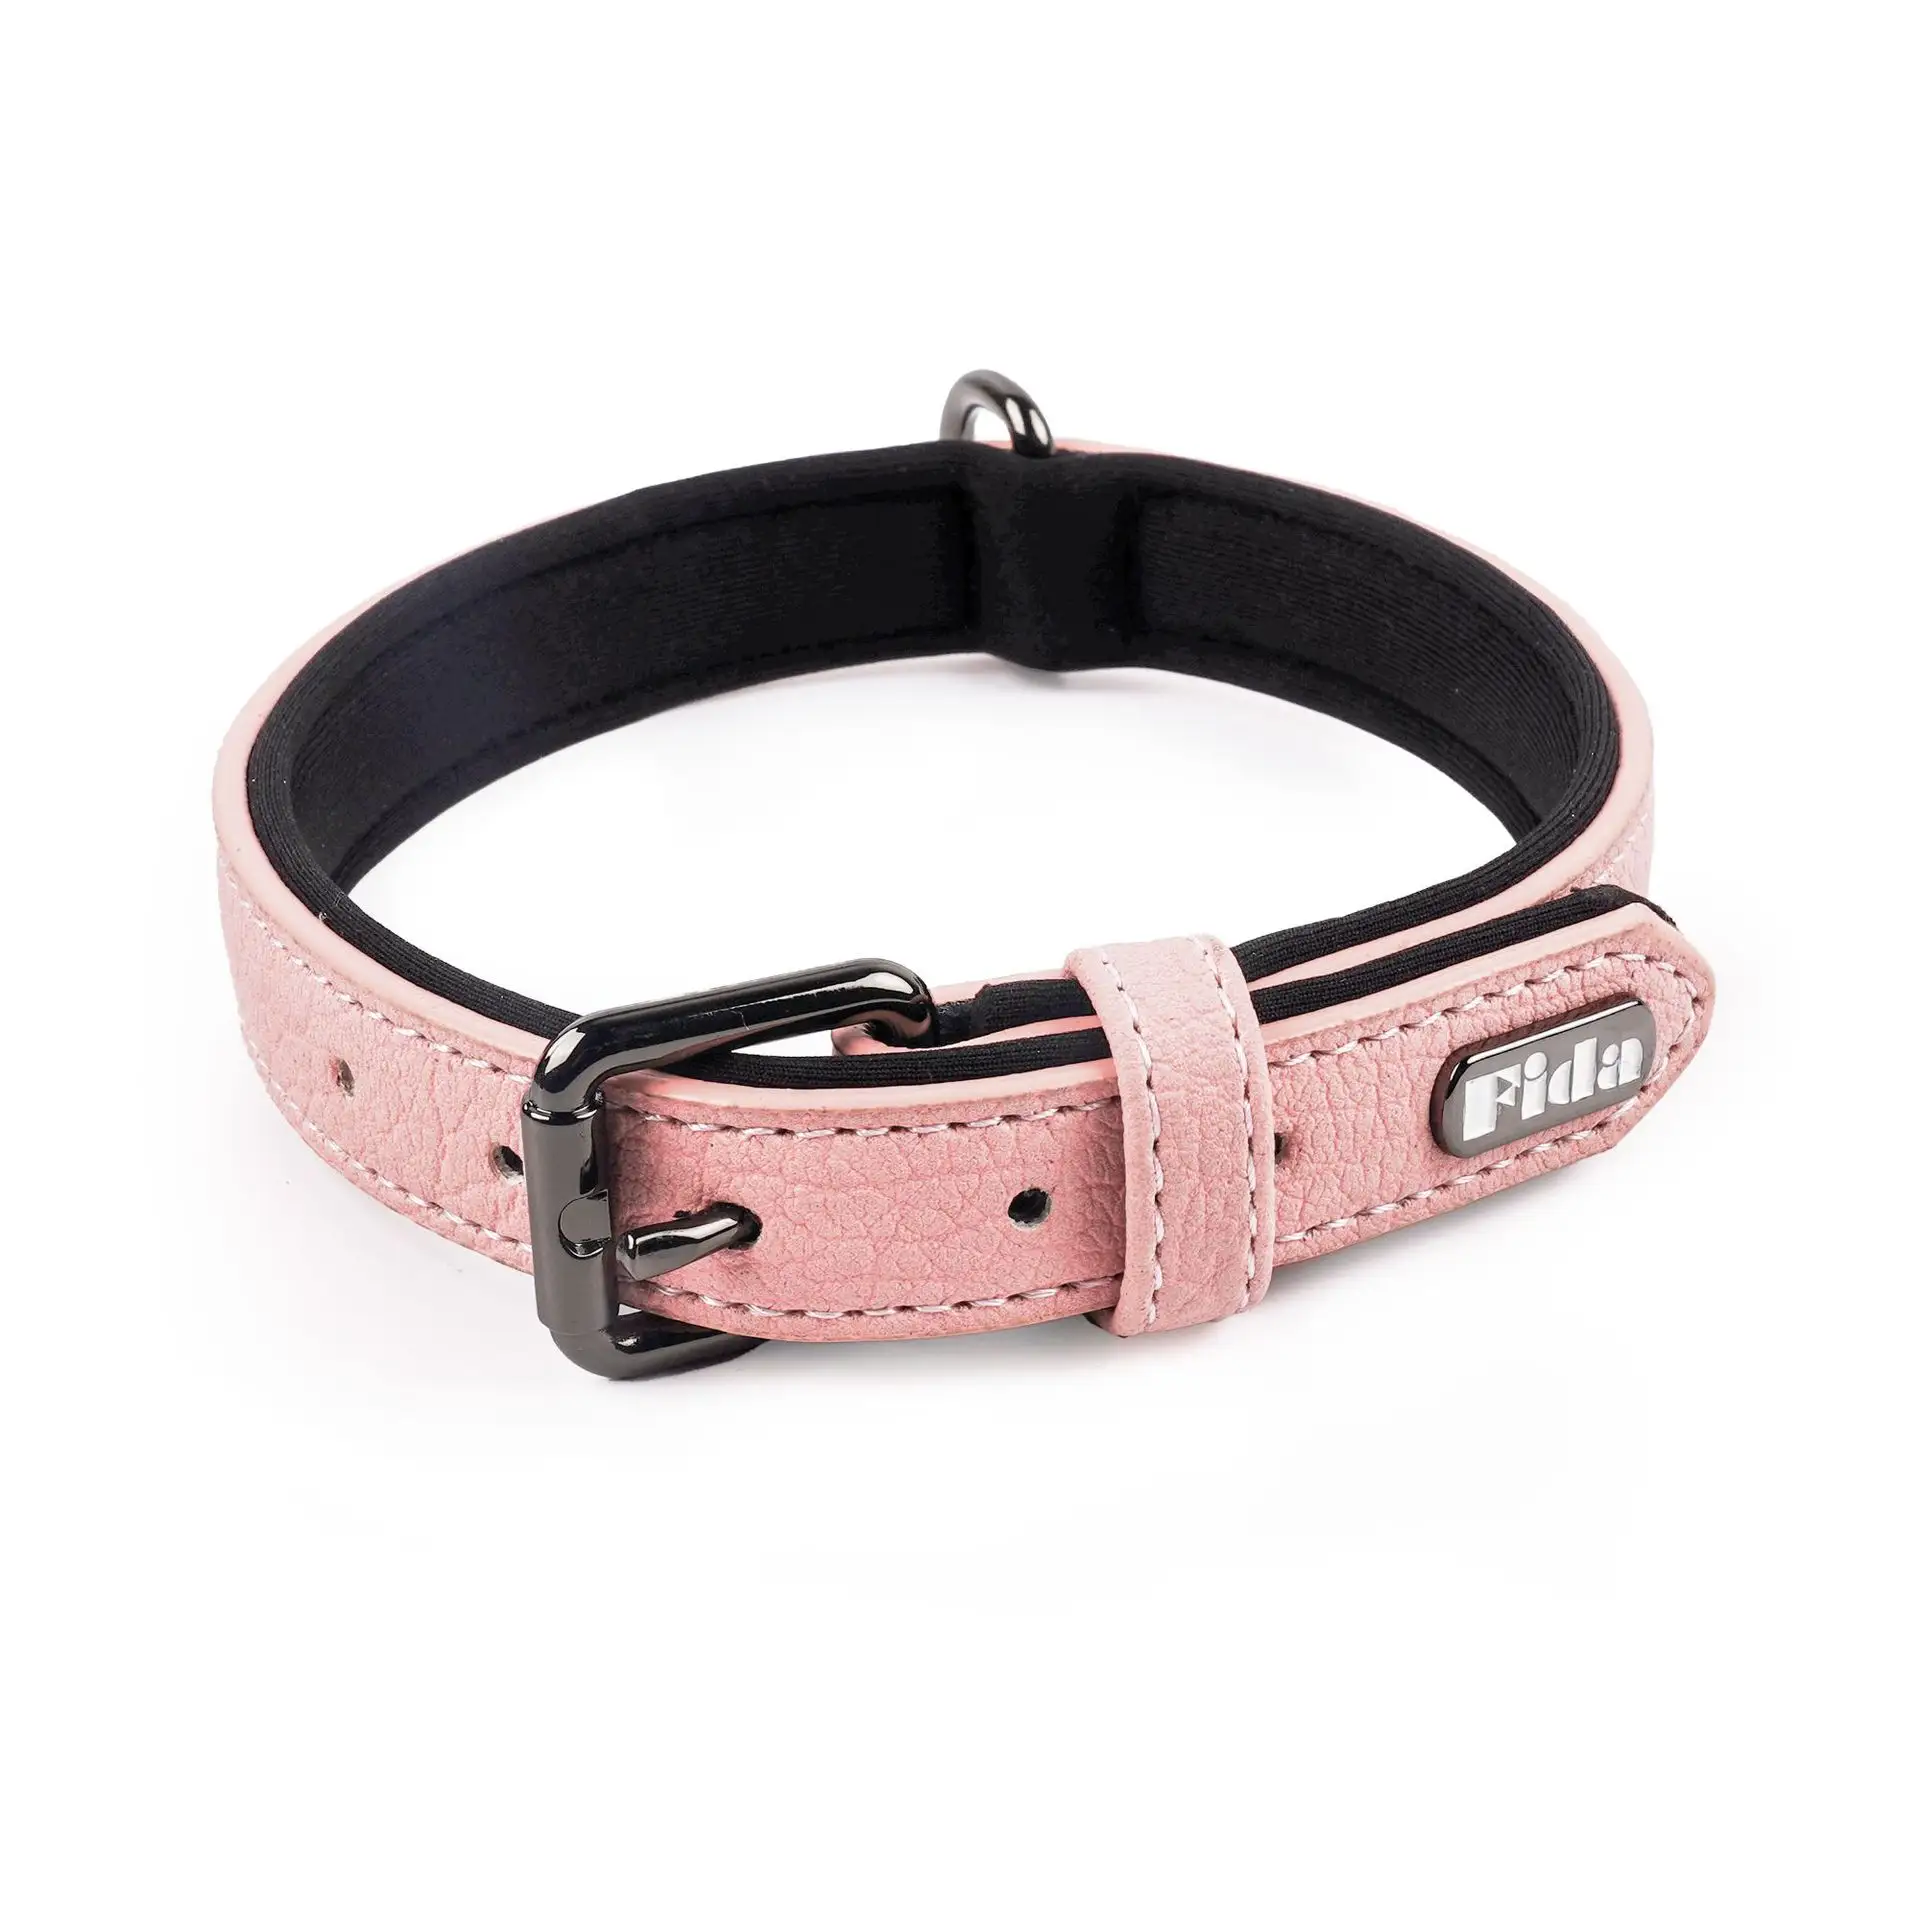 Leather Dog Collar Soft Padded Leather Collar with Adjustable Metal Buckle Leather Dog Collar